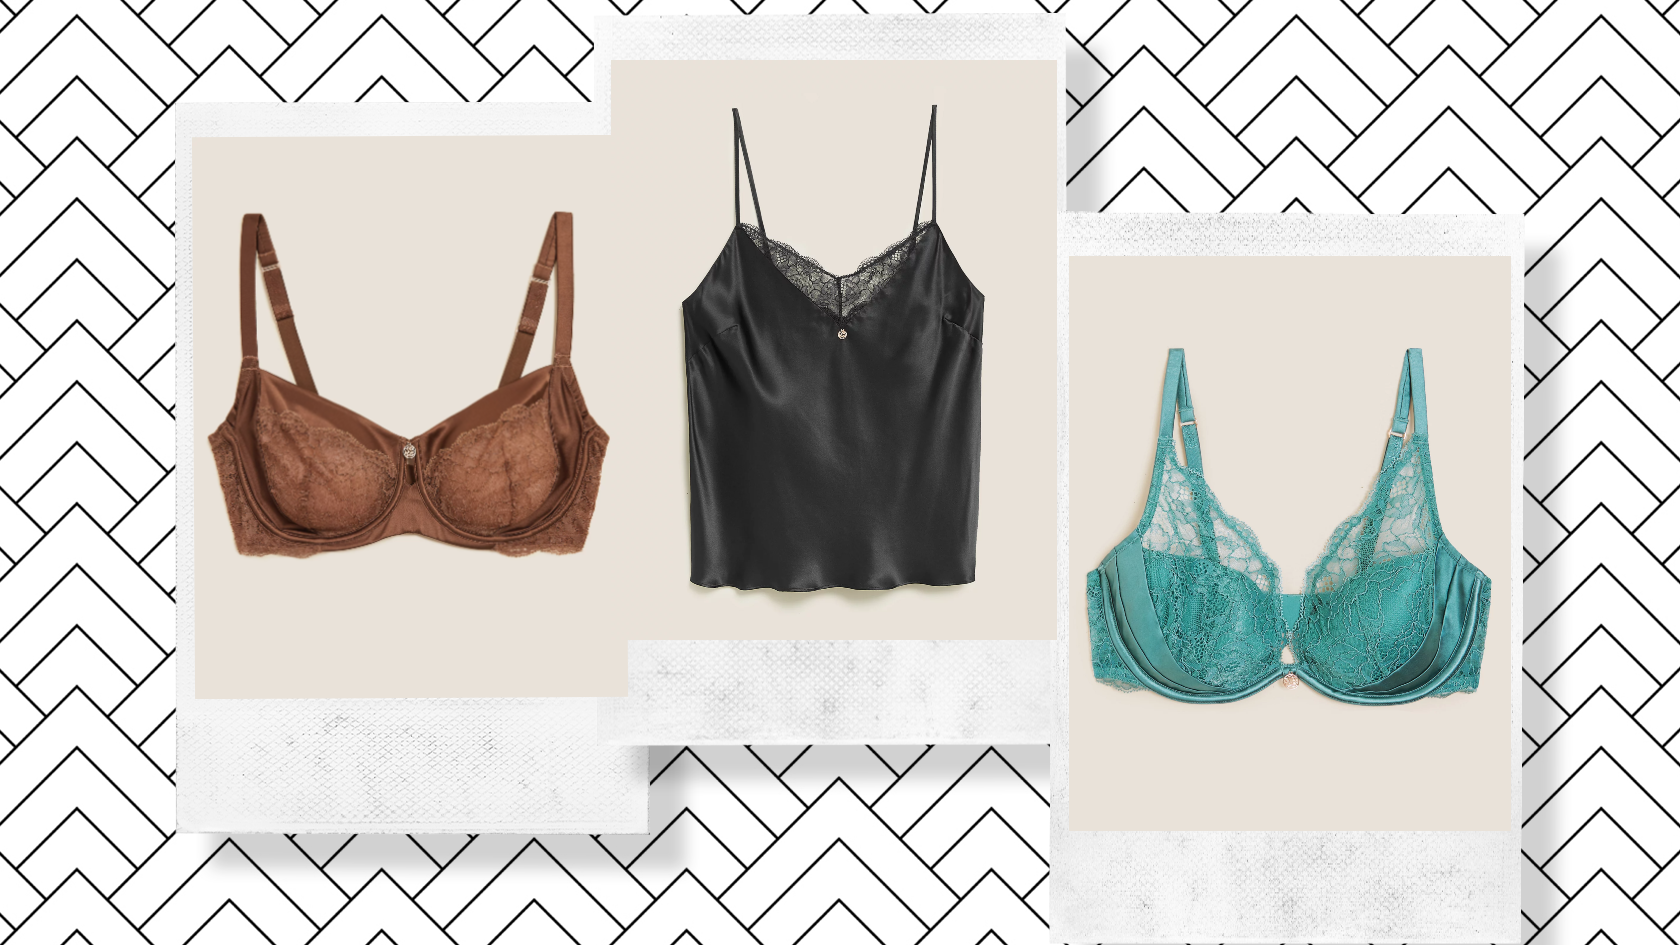 This M&S Bralette has rave reviews, but does it live up to the